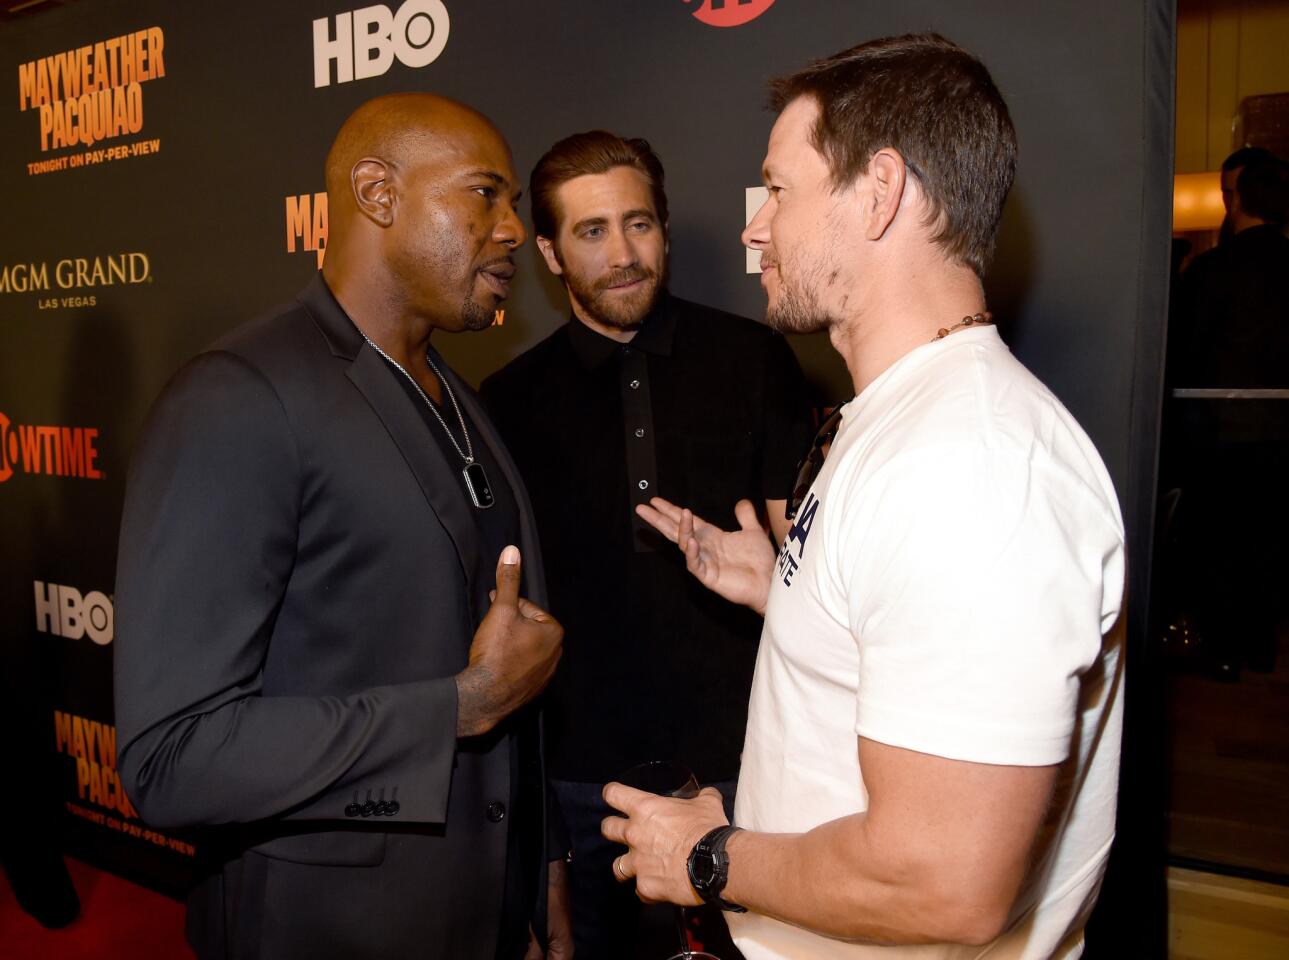 Showtime and HBO's pre-fight party